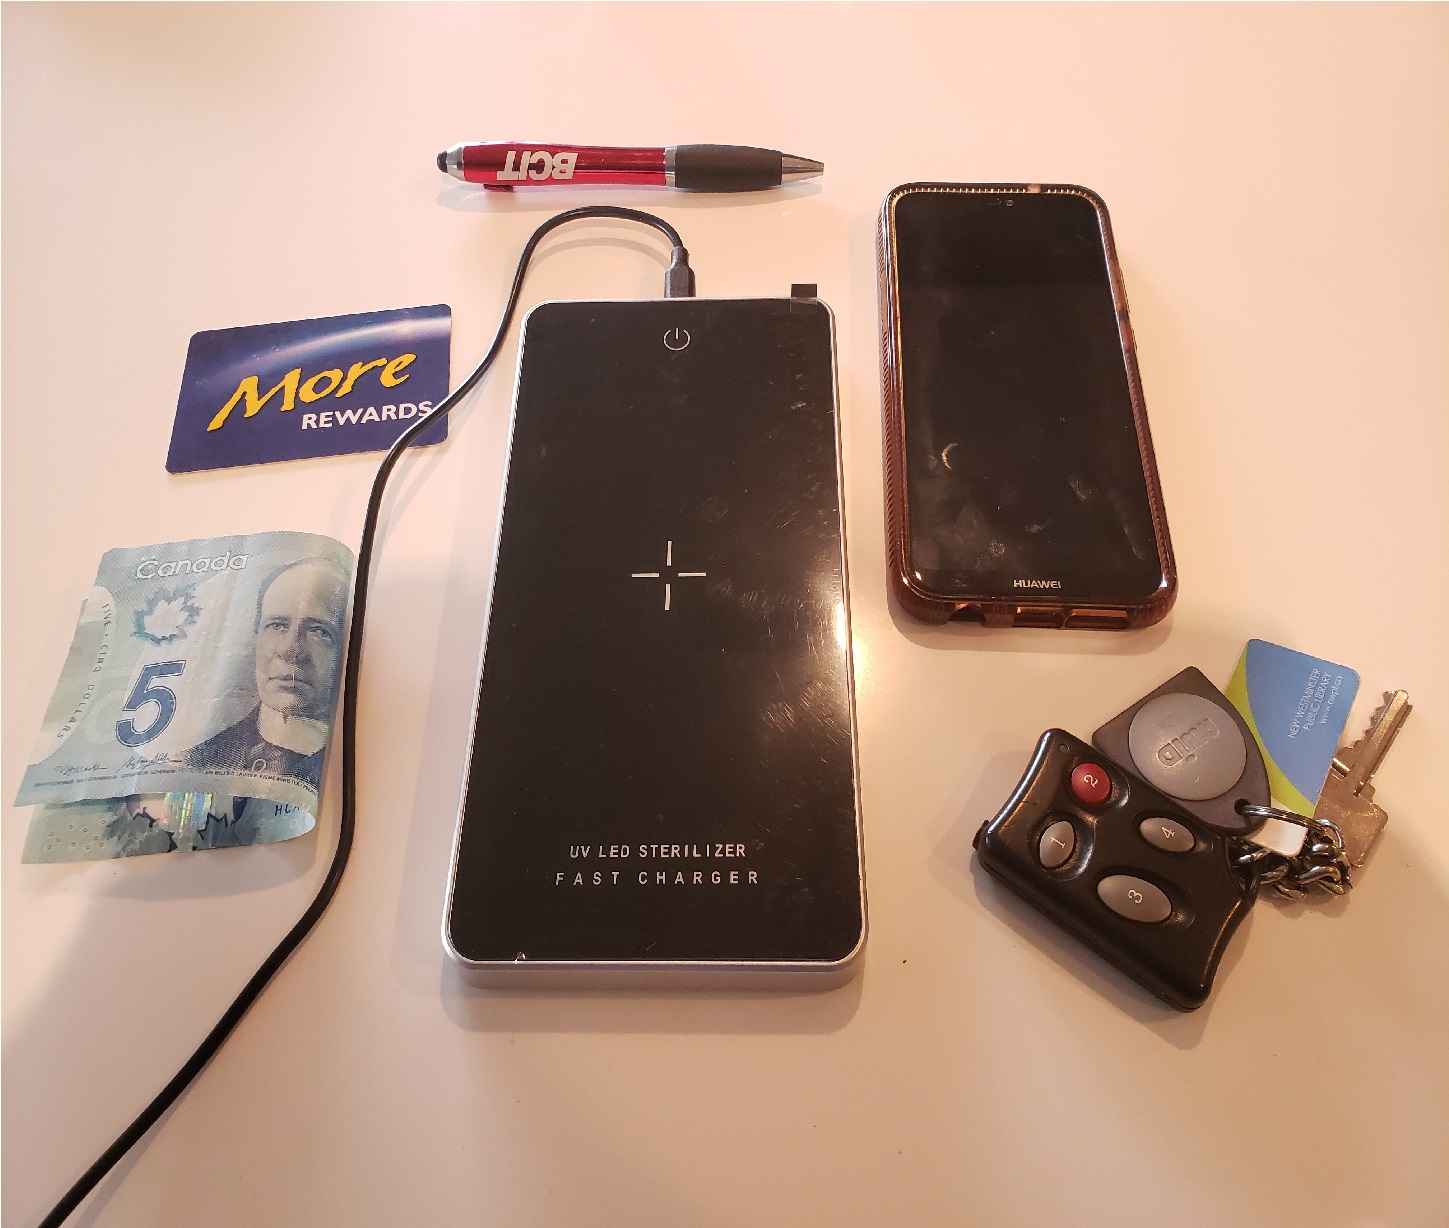 image of the UV sterilizer surrounded by items to sterilize: phone, keys, cash, a card, and a pen